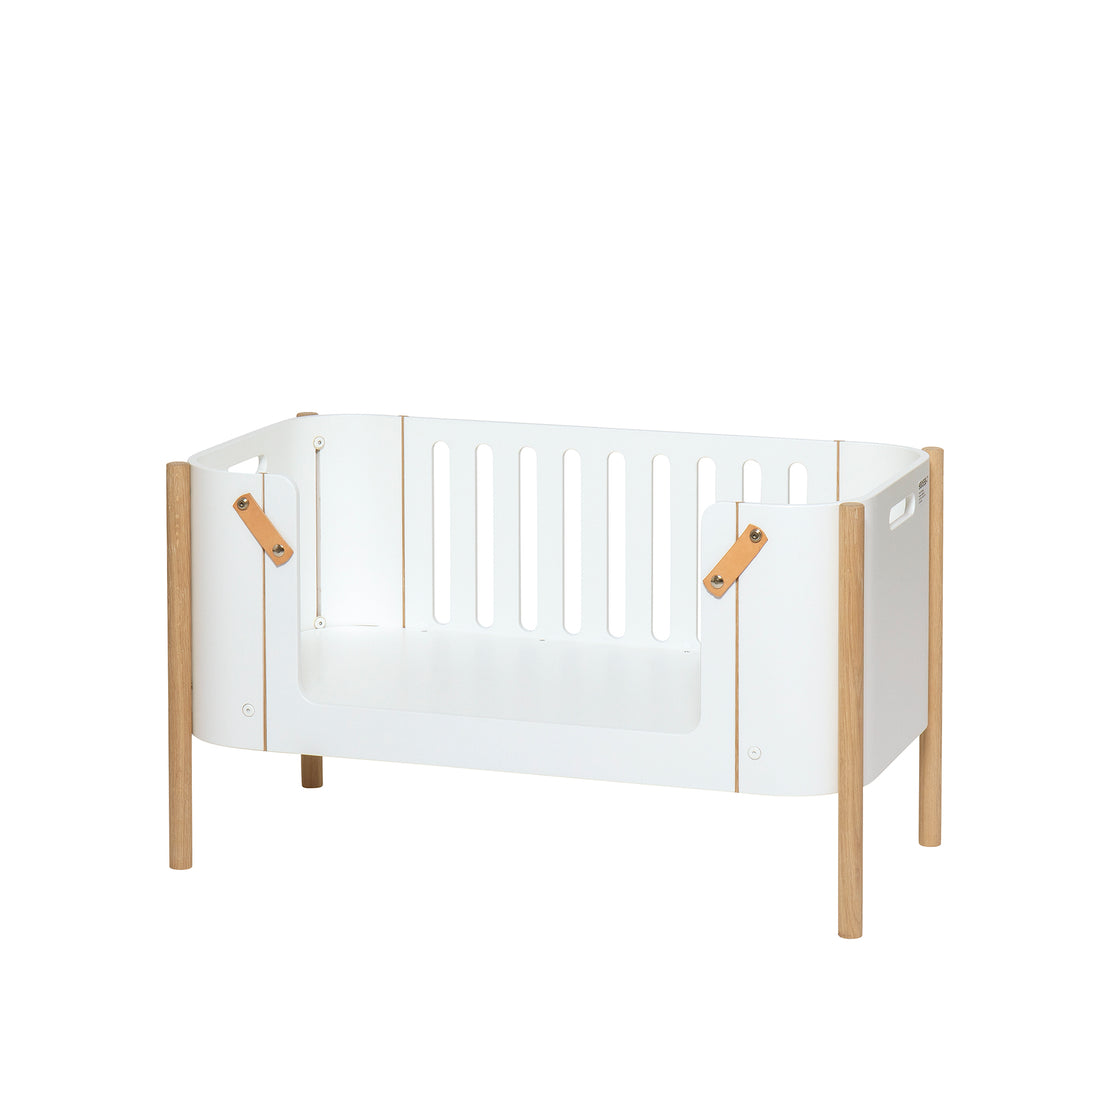 oliver-furniture-wood-co-sleeper-incl-bench-conversion-42x82-cm-white-oak-with-holder-mattress- (2)